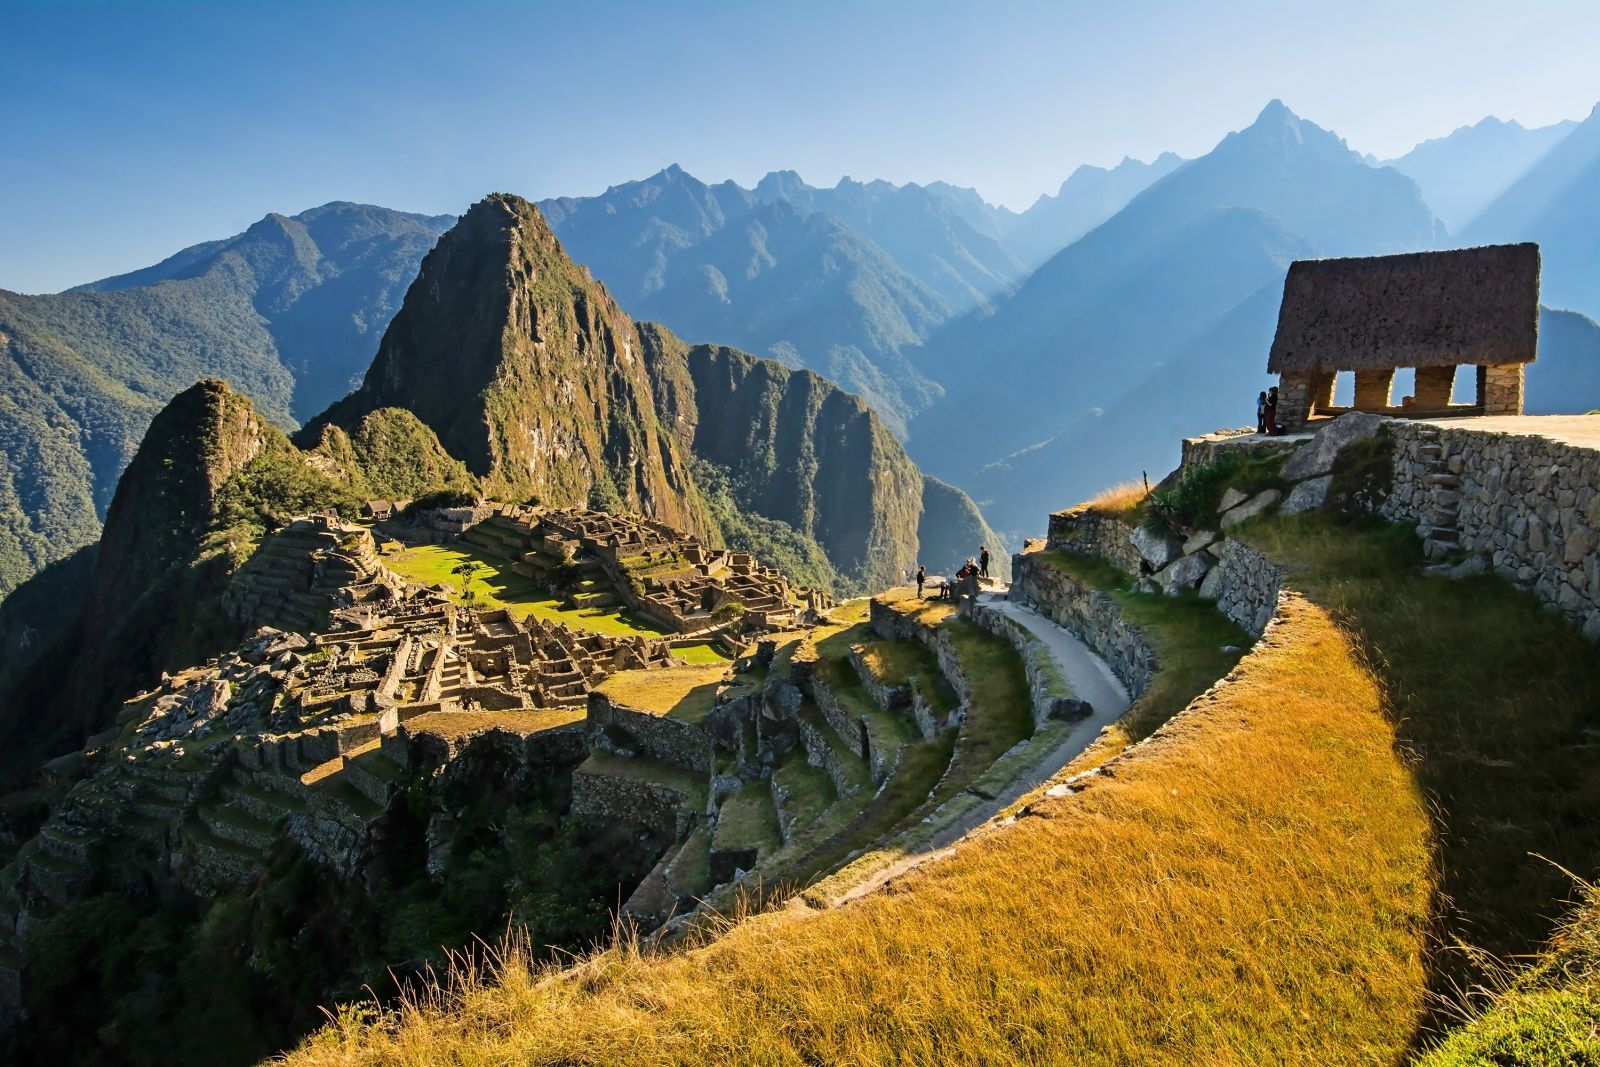 Side view of the Machu Picchu ruins and the Watchman's hut in Peru